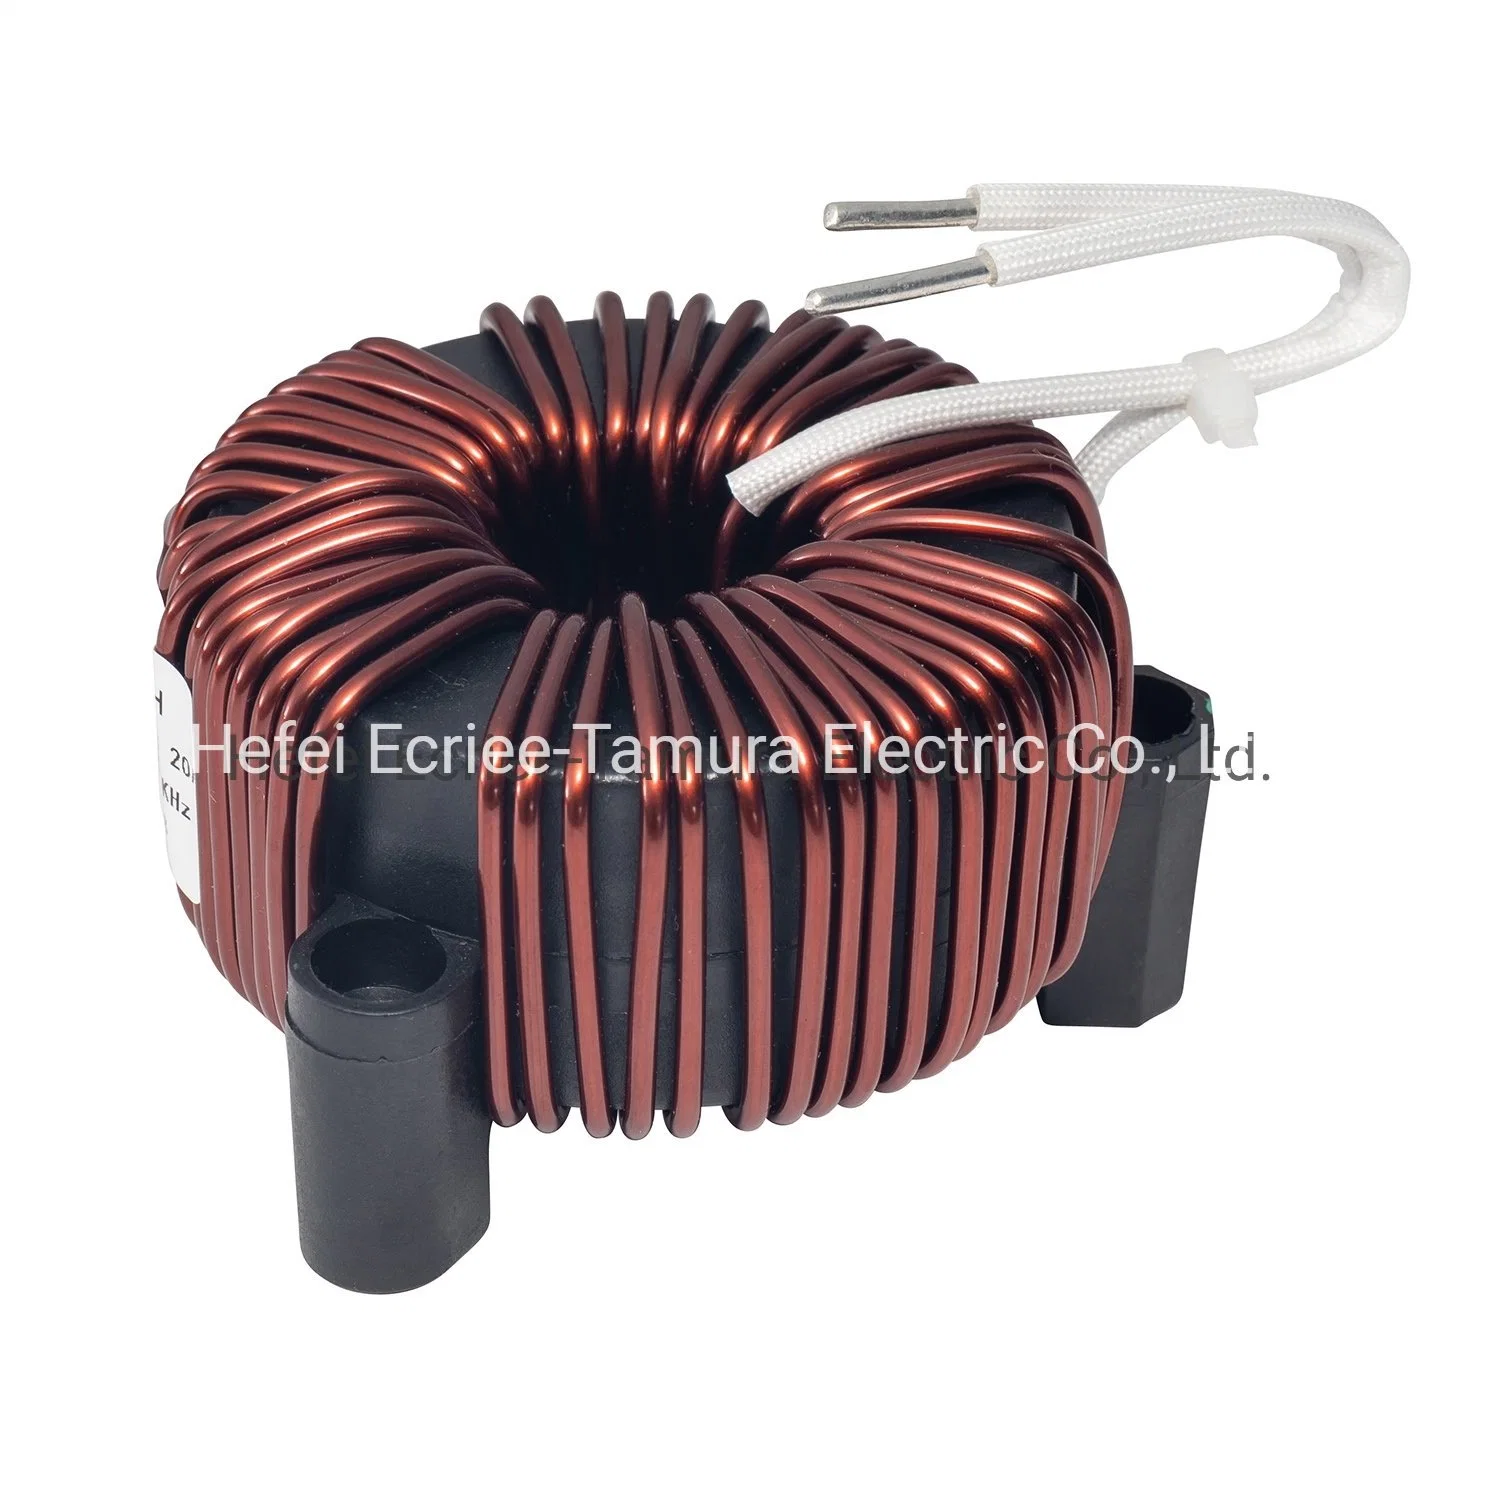 High Current Toroidal Common Mode Choke Ferrite Iron Core Inductor Coil 1mh for Switching Regulator Inductors